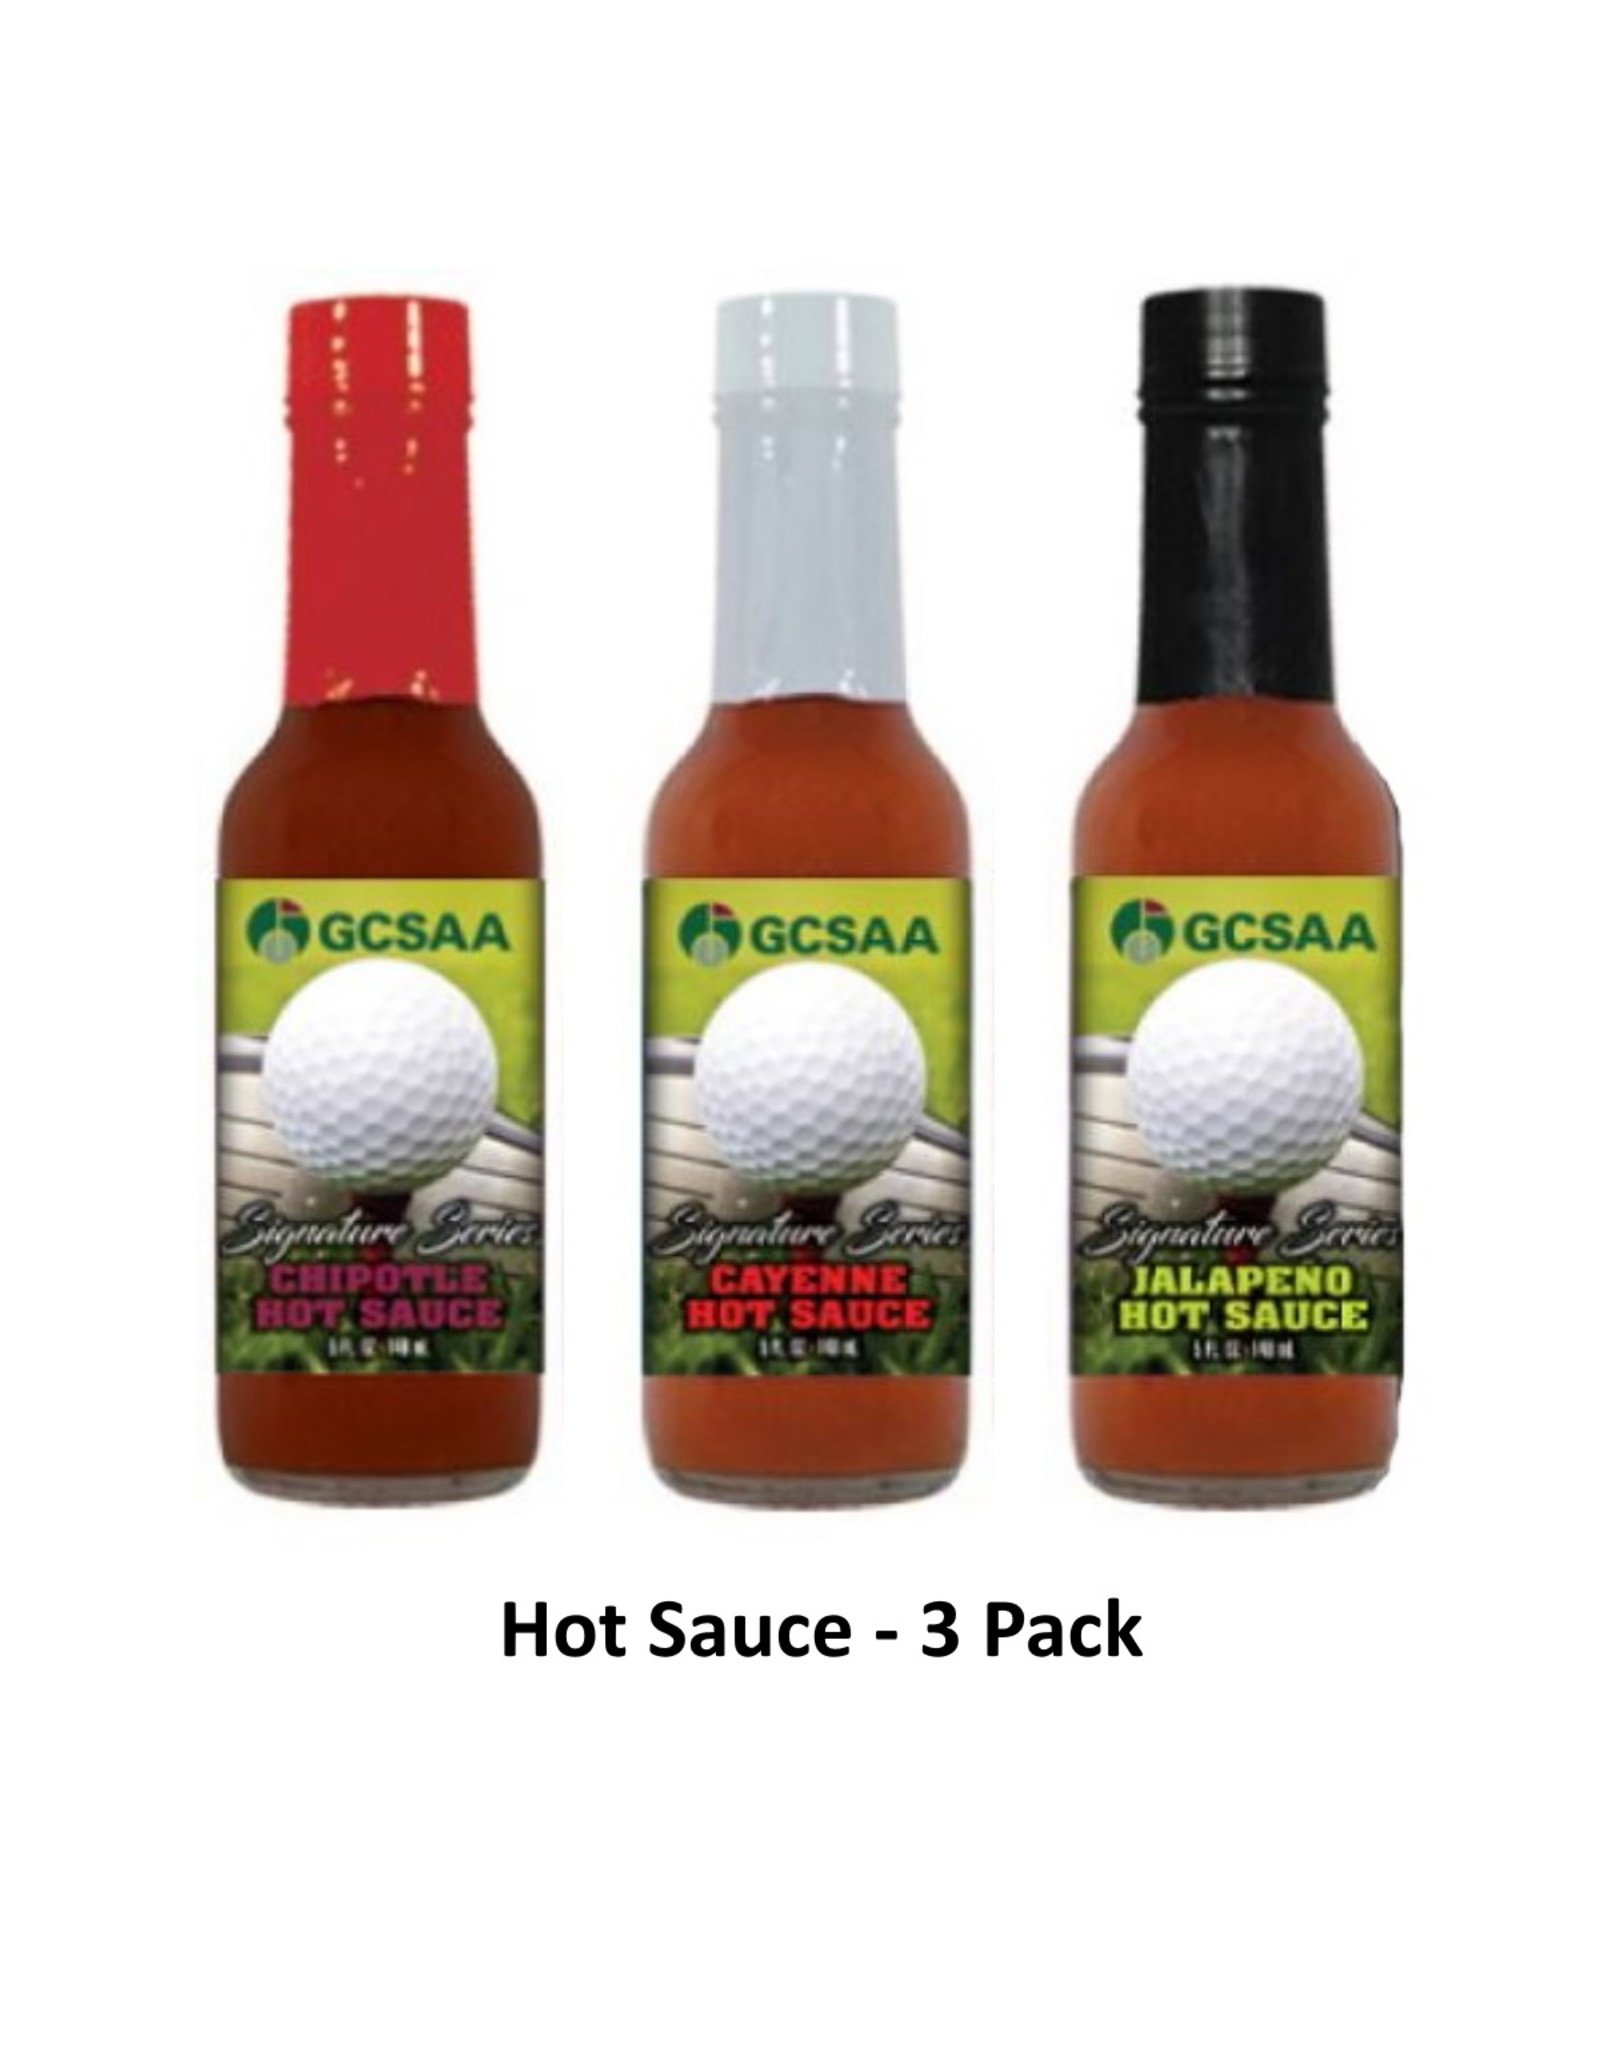 Hot Sauce - 3 Pack